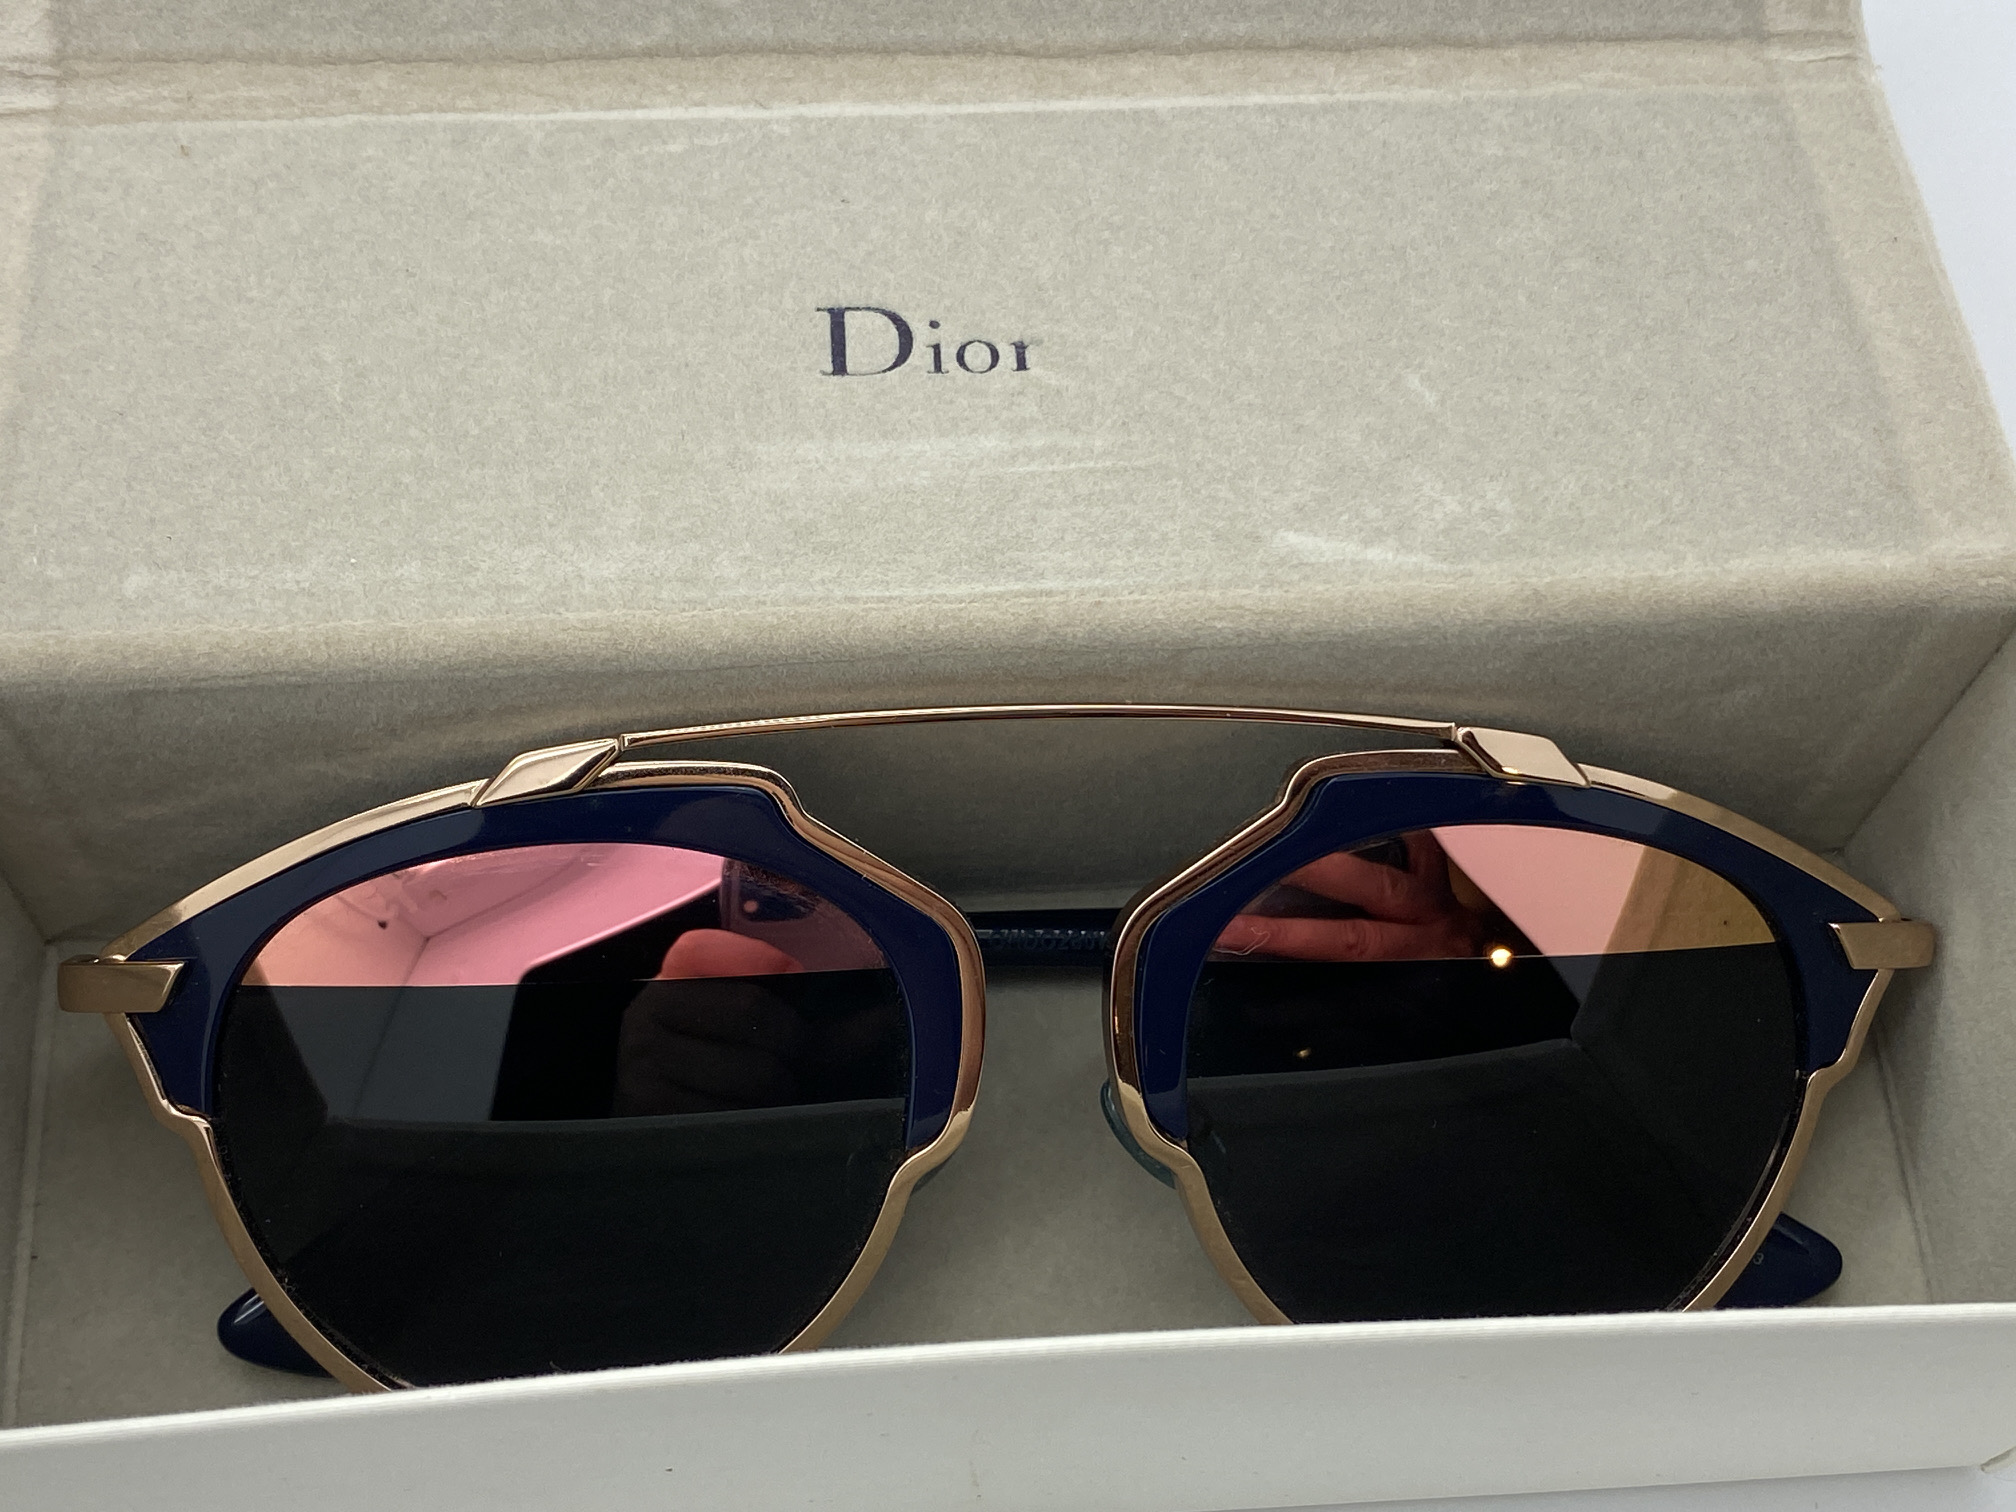 CHRISTIAN DIOR BOXED SUNGLASSES WITH CASE - Image 7 of 8